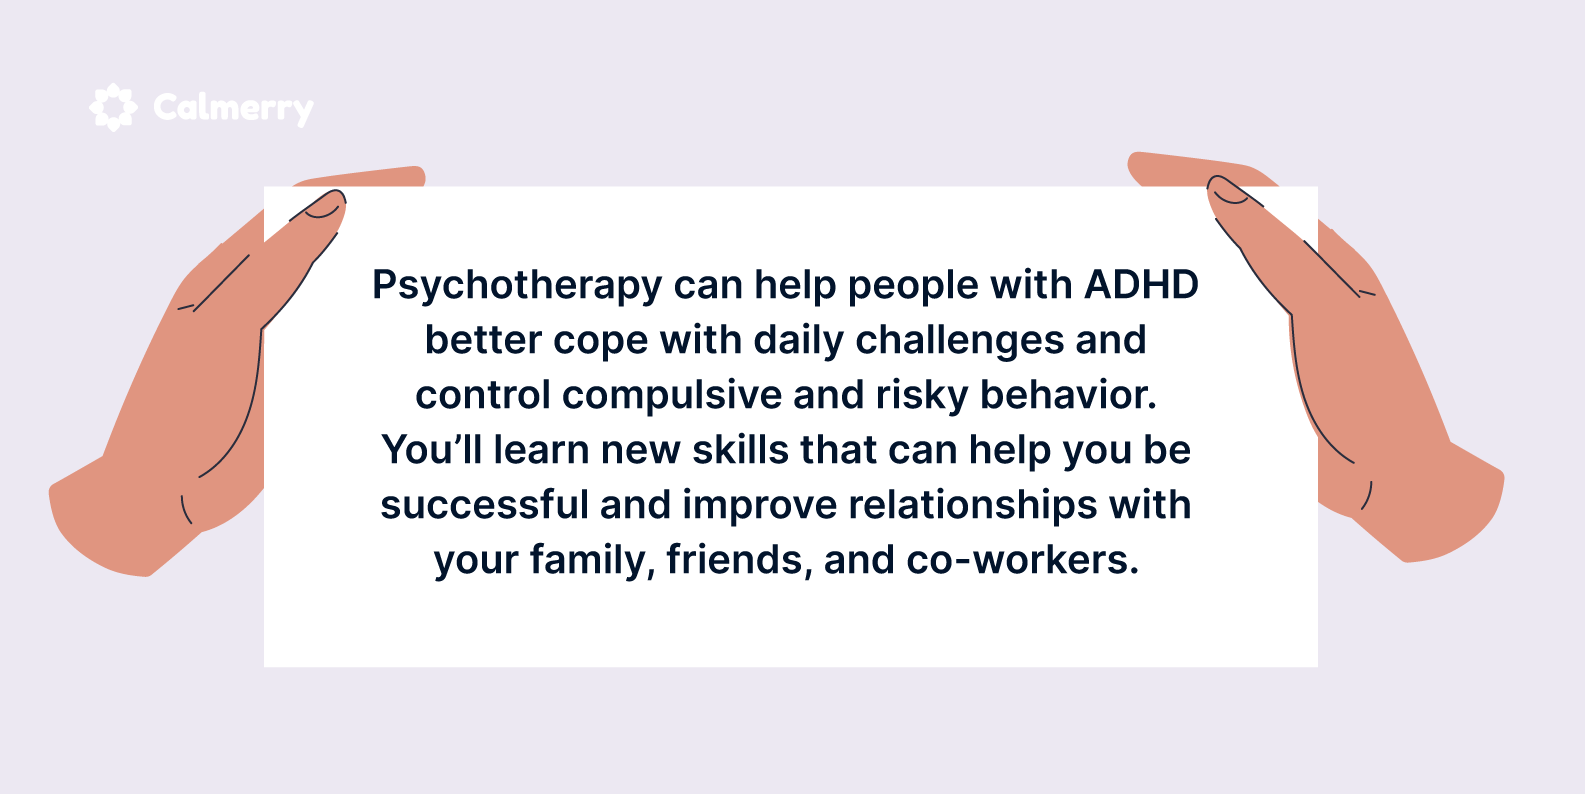 Psychotherapy can help people with ADHD better cope with daily challenges and control compulsive and risky behavior. You’ll learn new skills that can help you be successful and improve relationships with your family, friends, and co-workers.